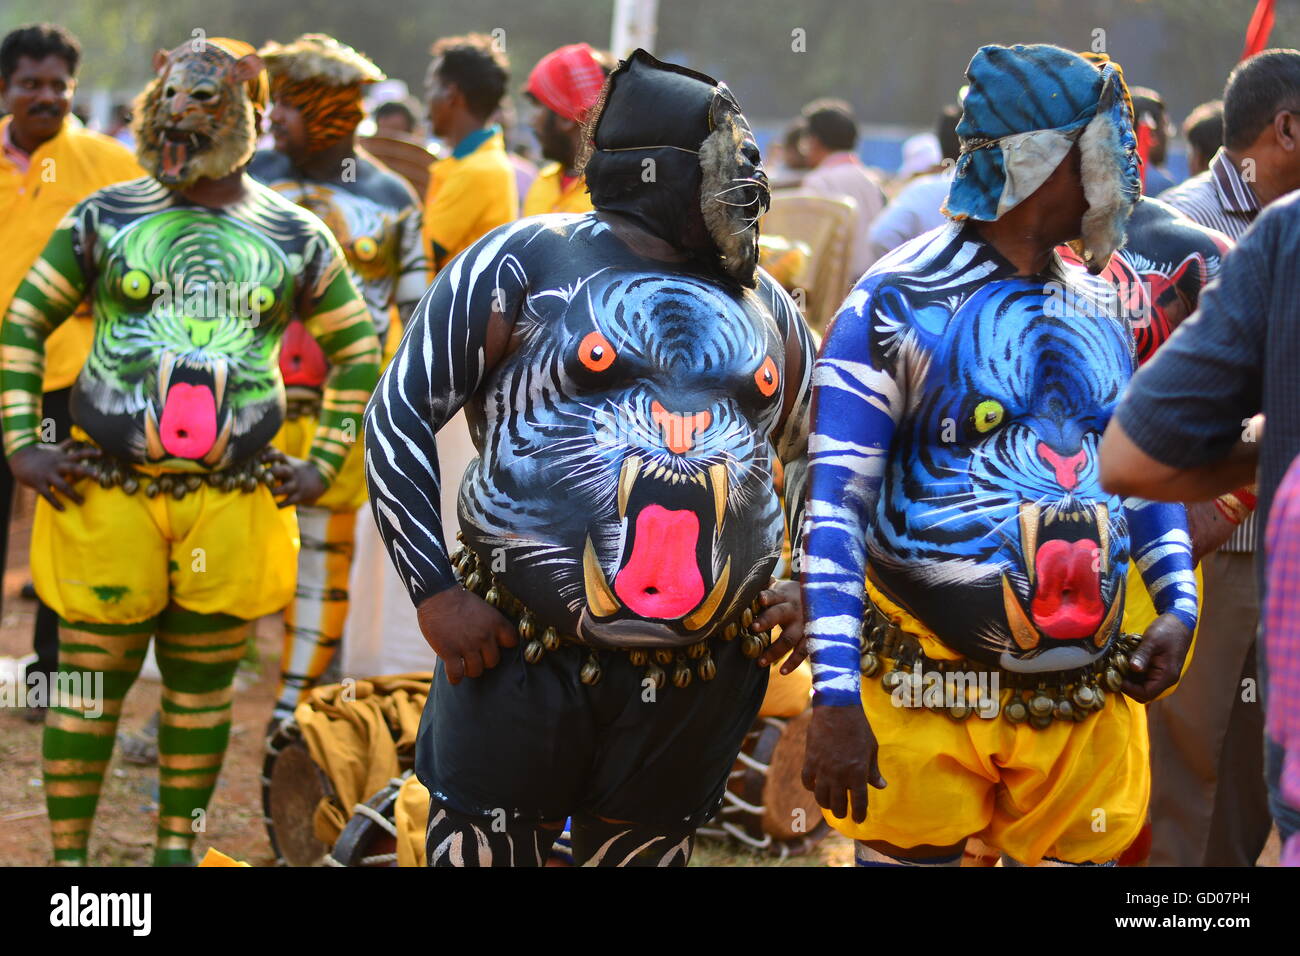 Puli kali (Tiger dance) by a group of fat obese men colorful festival in  Kerala India Stock Photo - Alamy